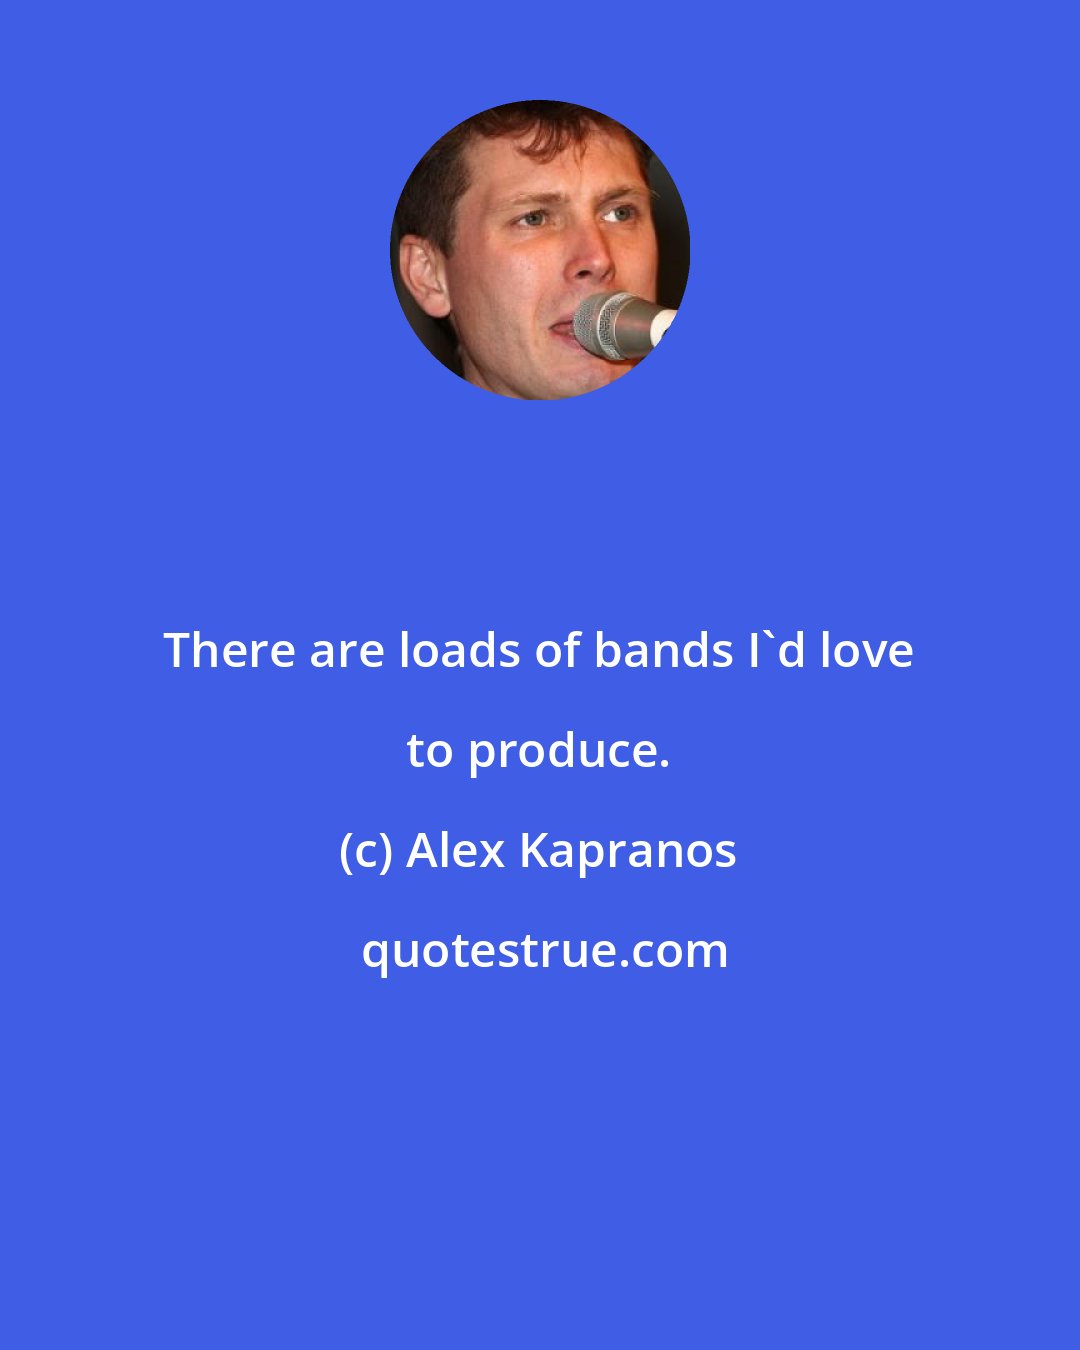 Alex Kapranos: There are loads of bands I'd love to produce.